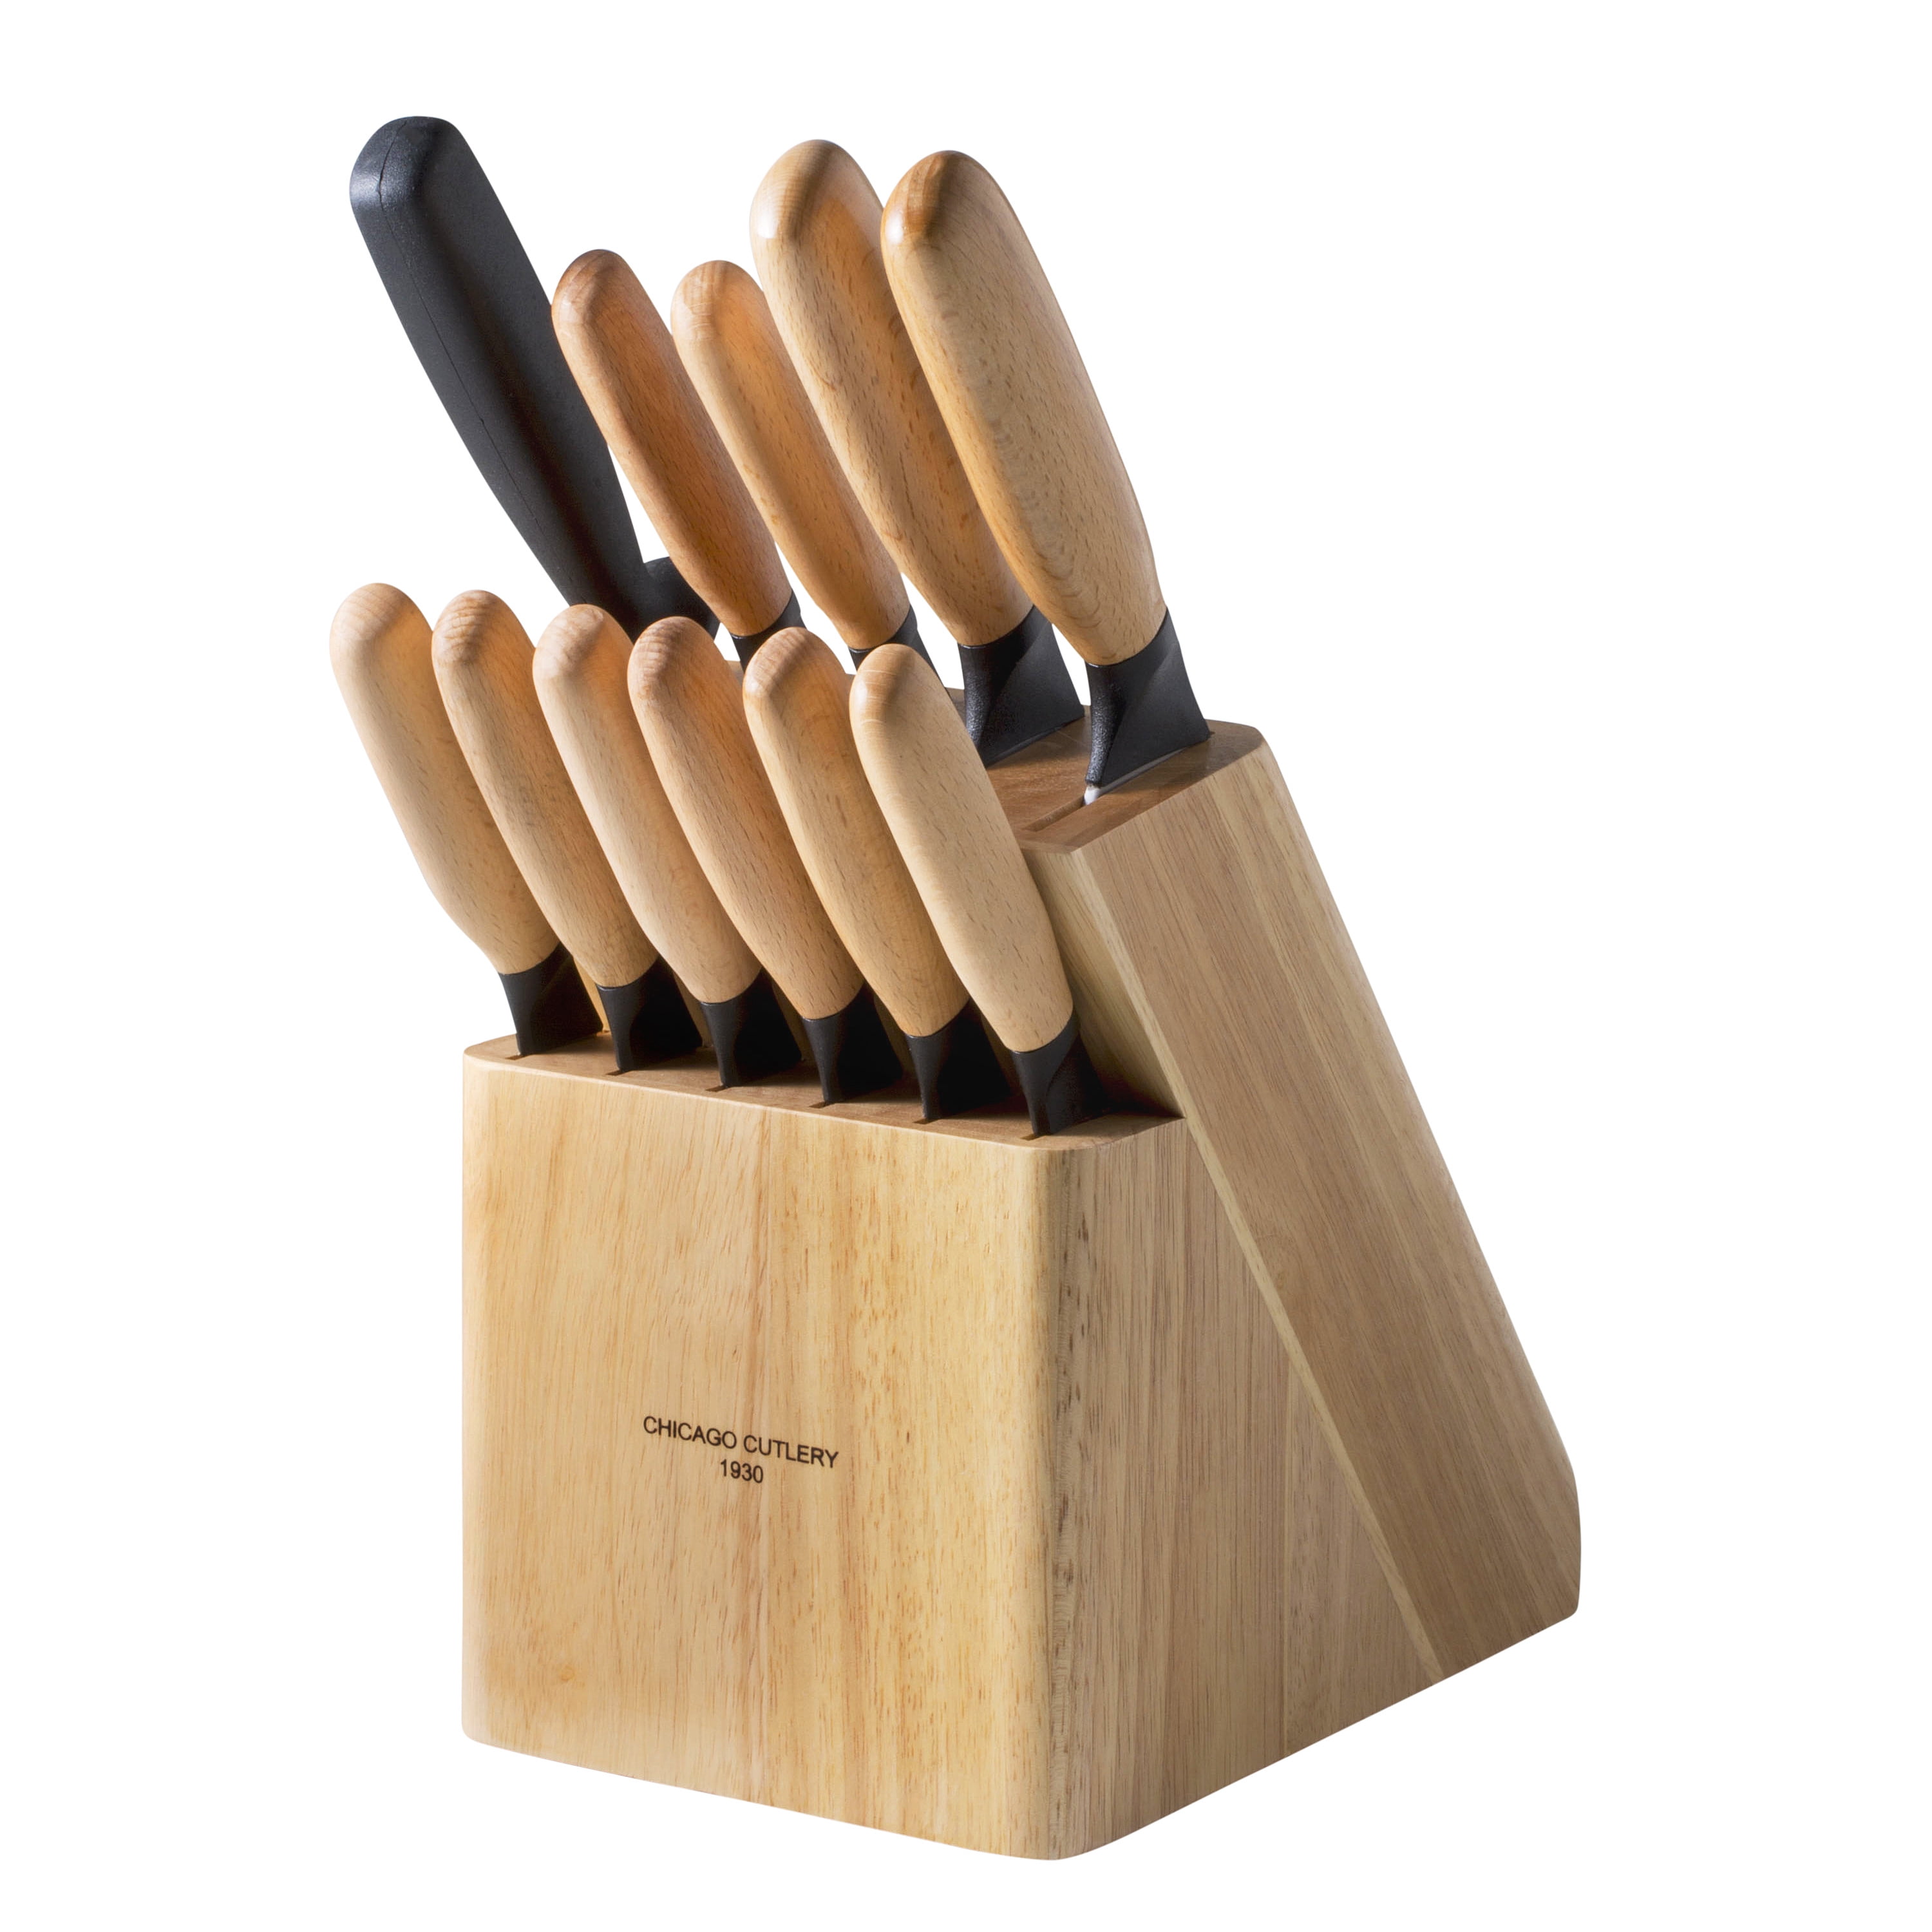 Chicago Cutlery Knife set 9E16AD wood block 17 pc Stainless Steel